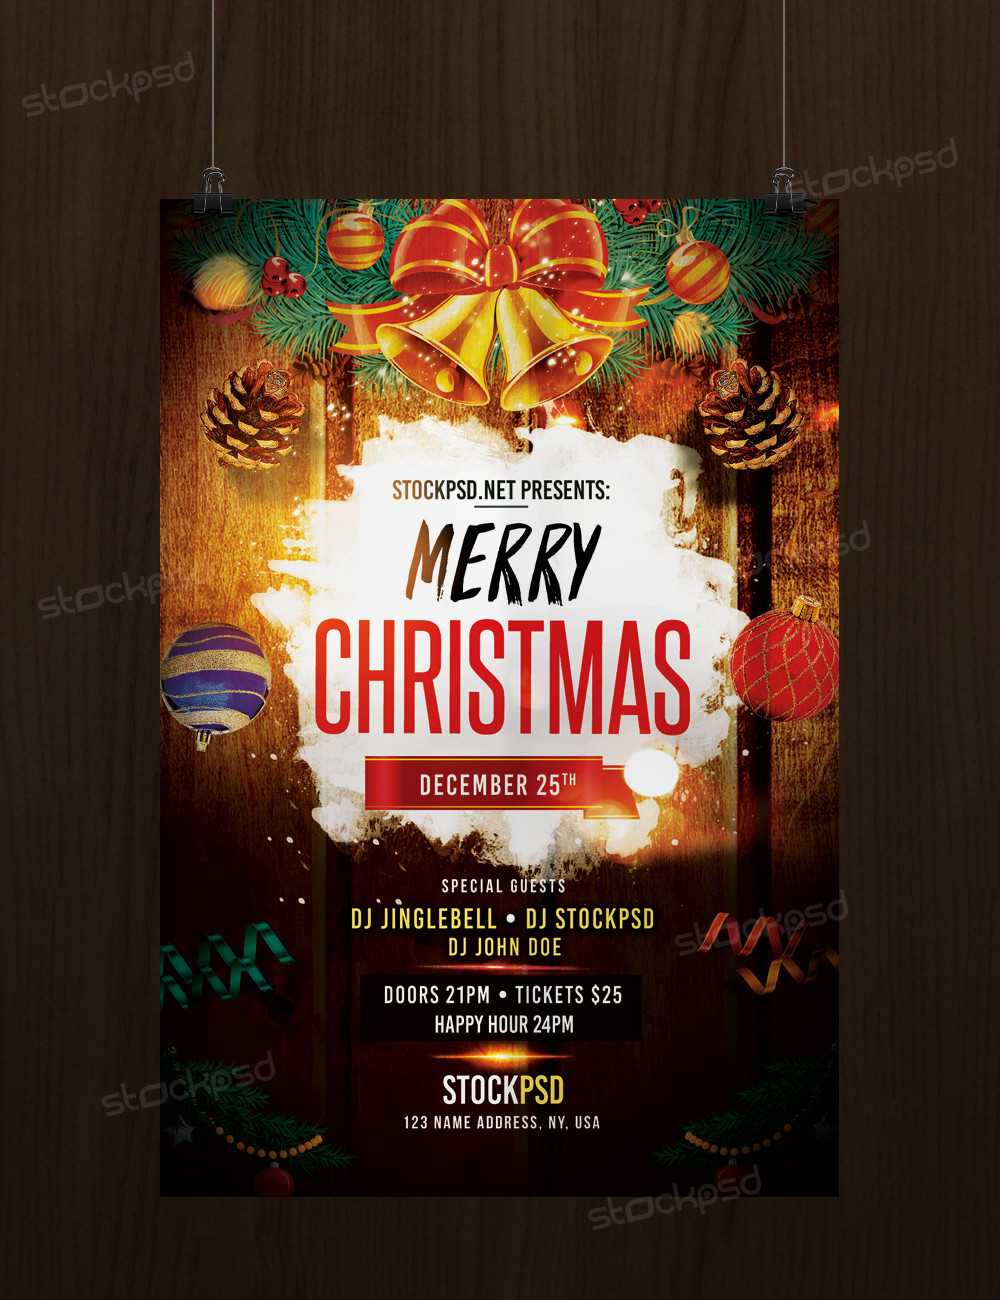 Download Merry Christmas – Free Psd Flyer Template – Free Pertaining To Christmas Brochure Templates Free